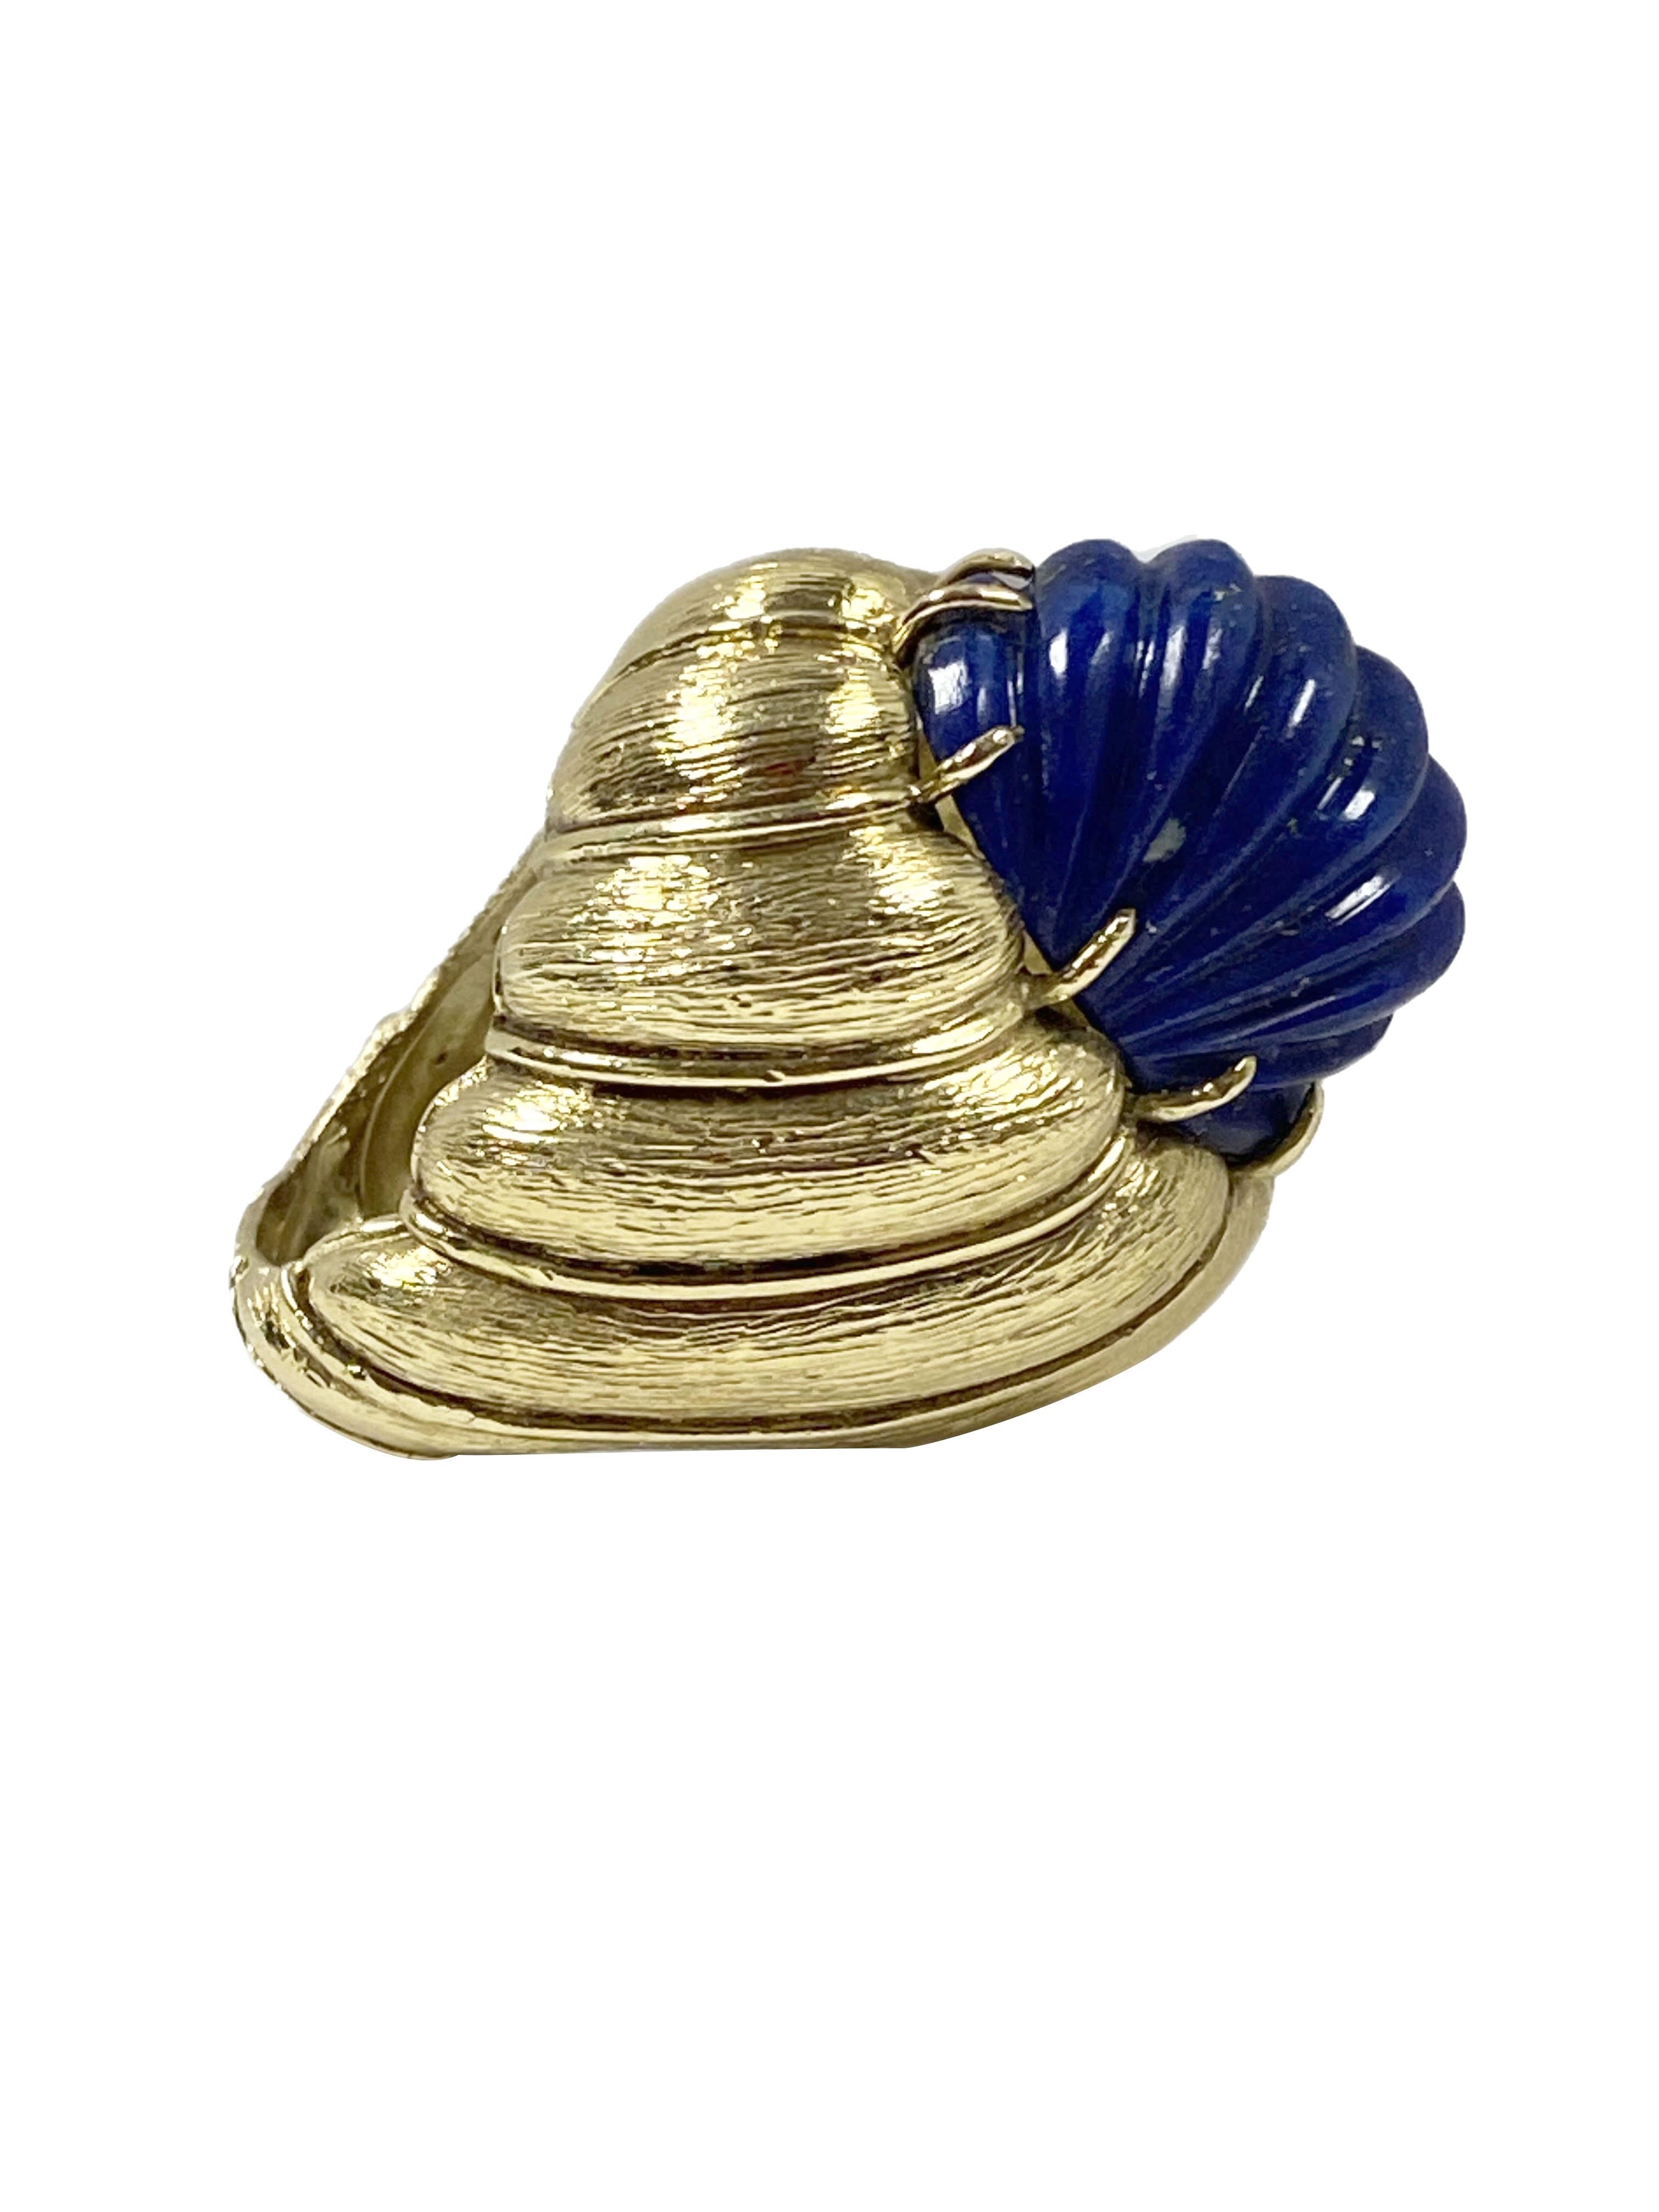 Modern Vintage Large and Impressive Yellow Gold and Lapis Scalloped Dome Ring